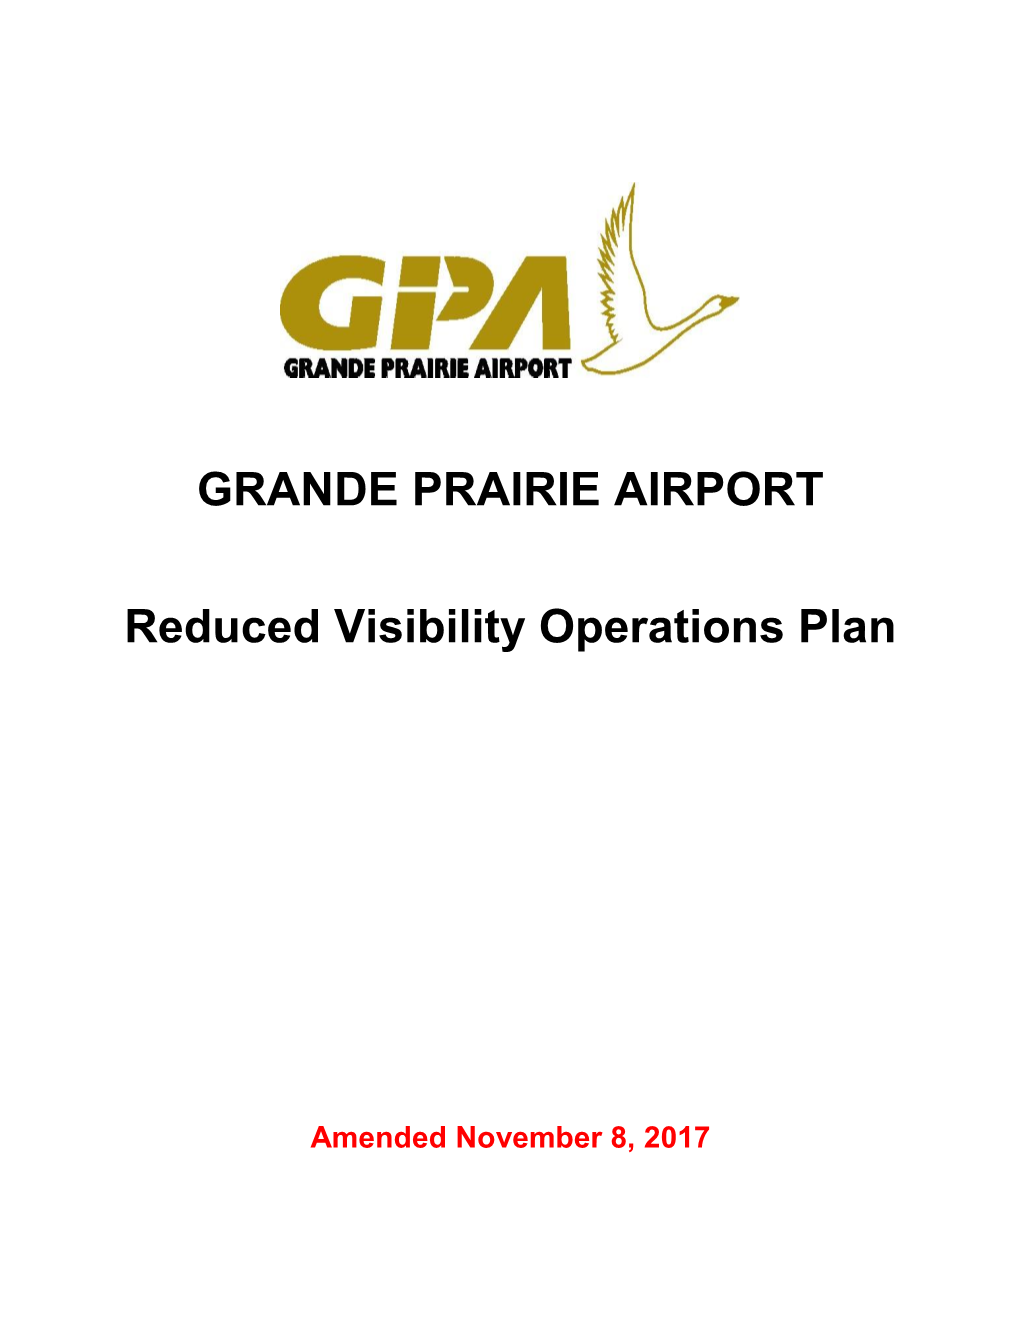 Grande Prairie Airport Reduced Visibility Operations Plan Will Be Issued to All Scheduled Air Carriers